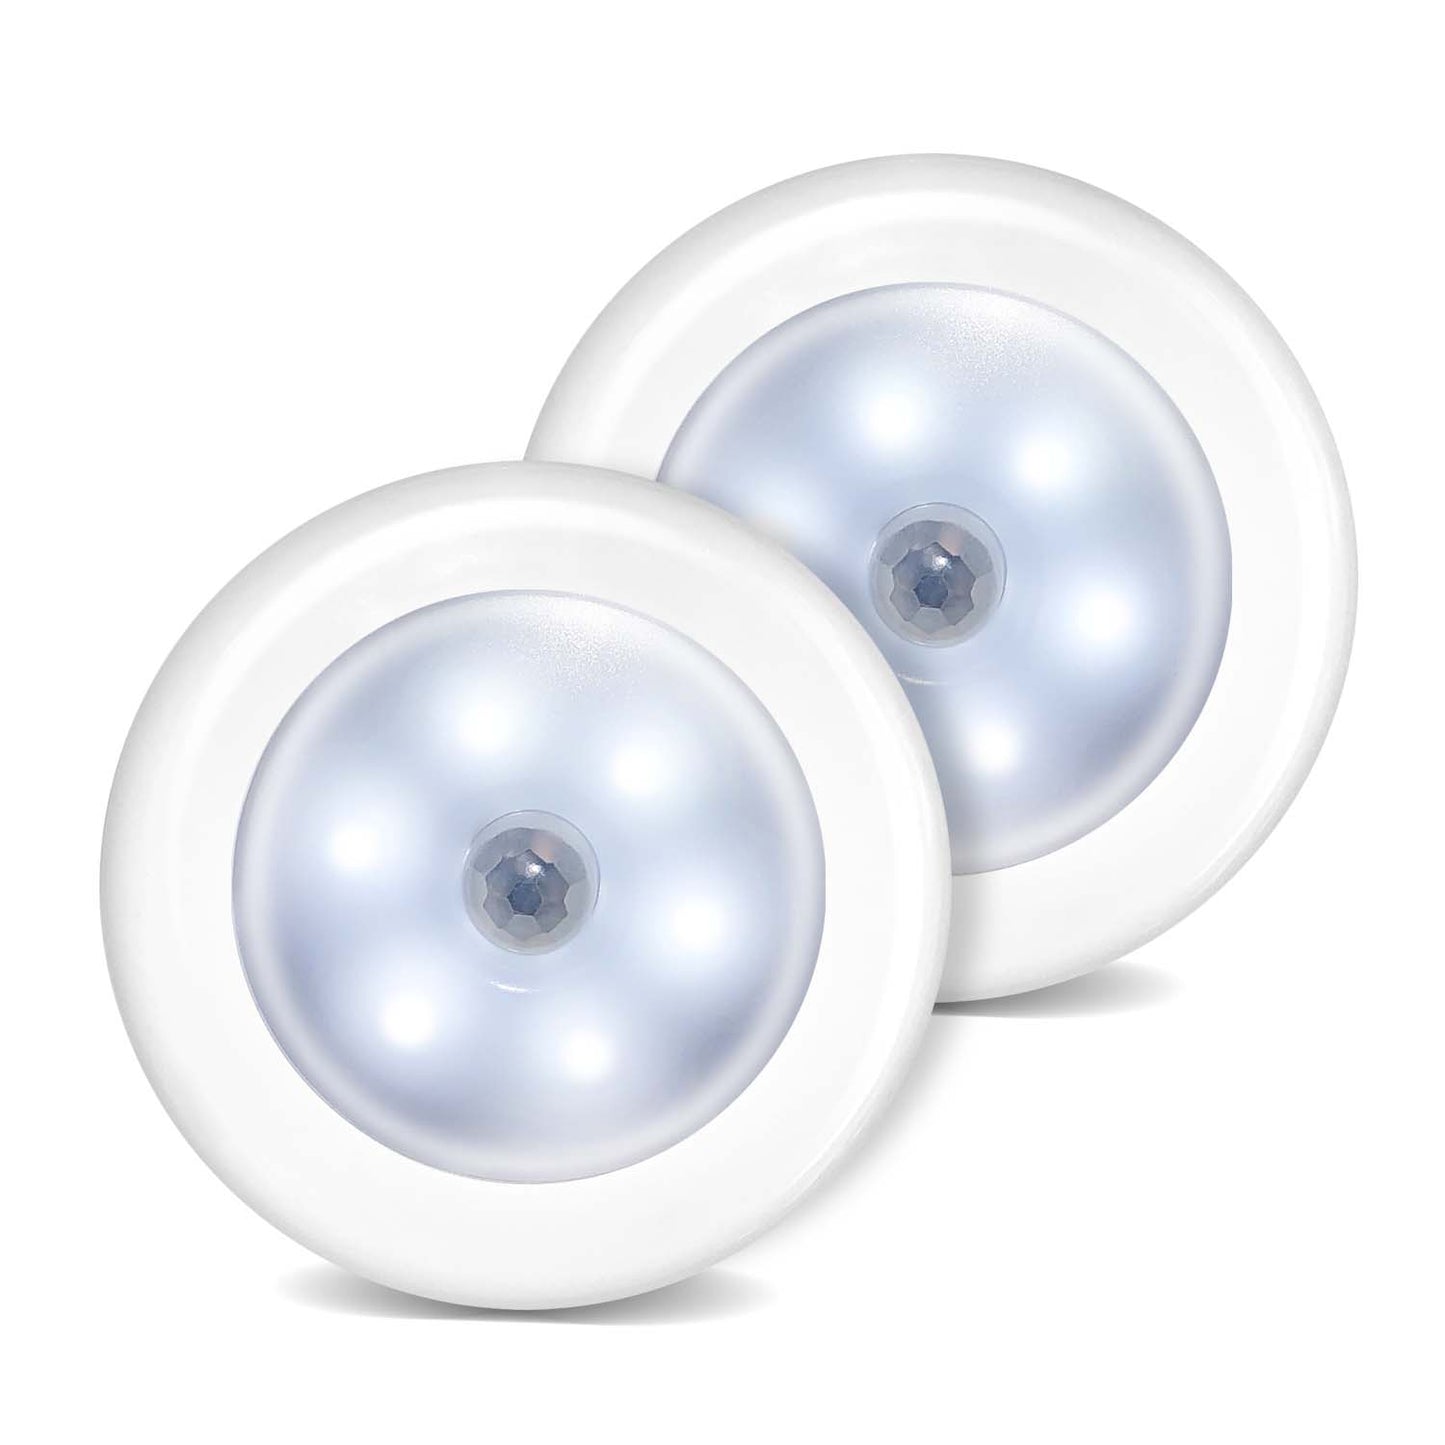 Motion Sensor Night Lights - Ultra Bright LED Lights, No Nails or Screws Required!